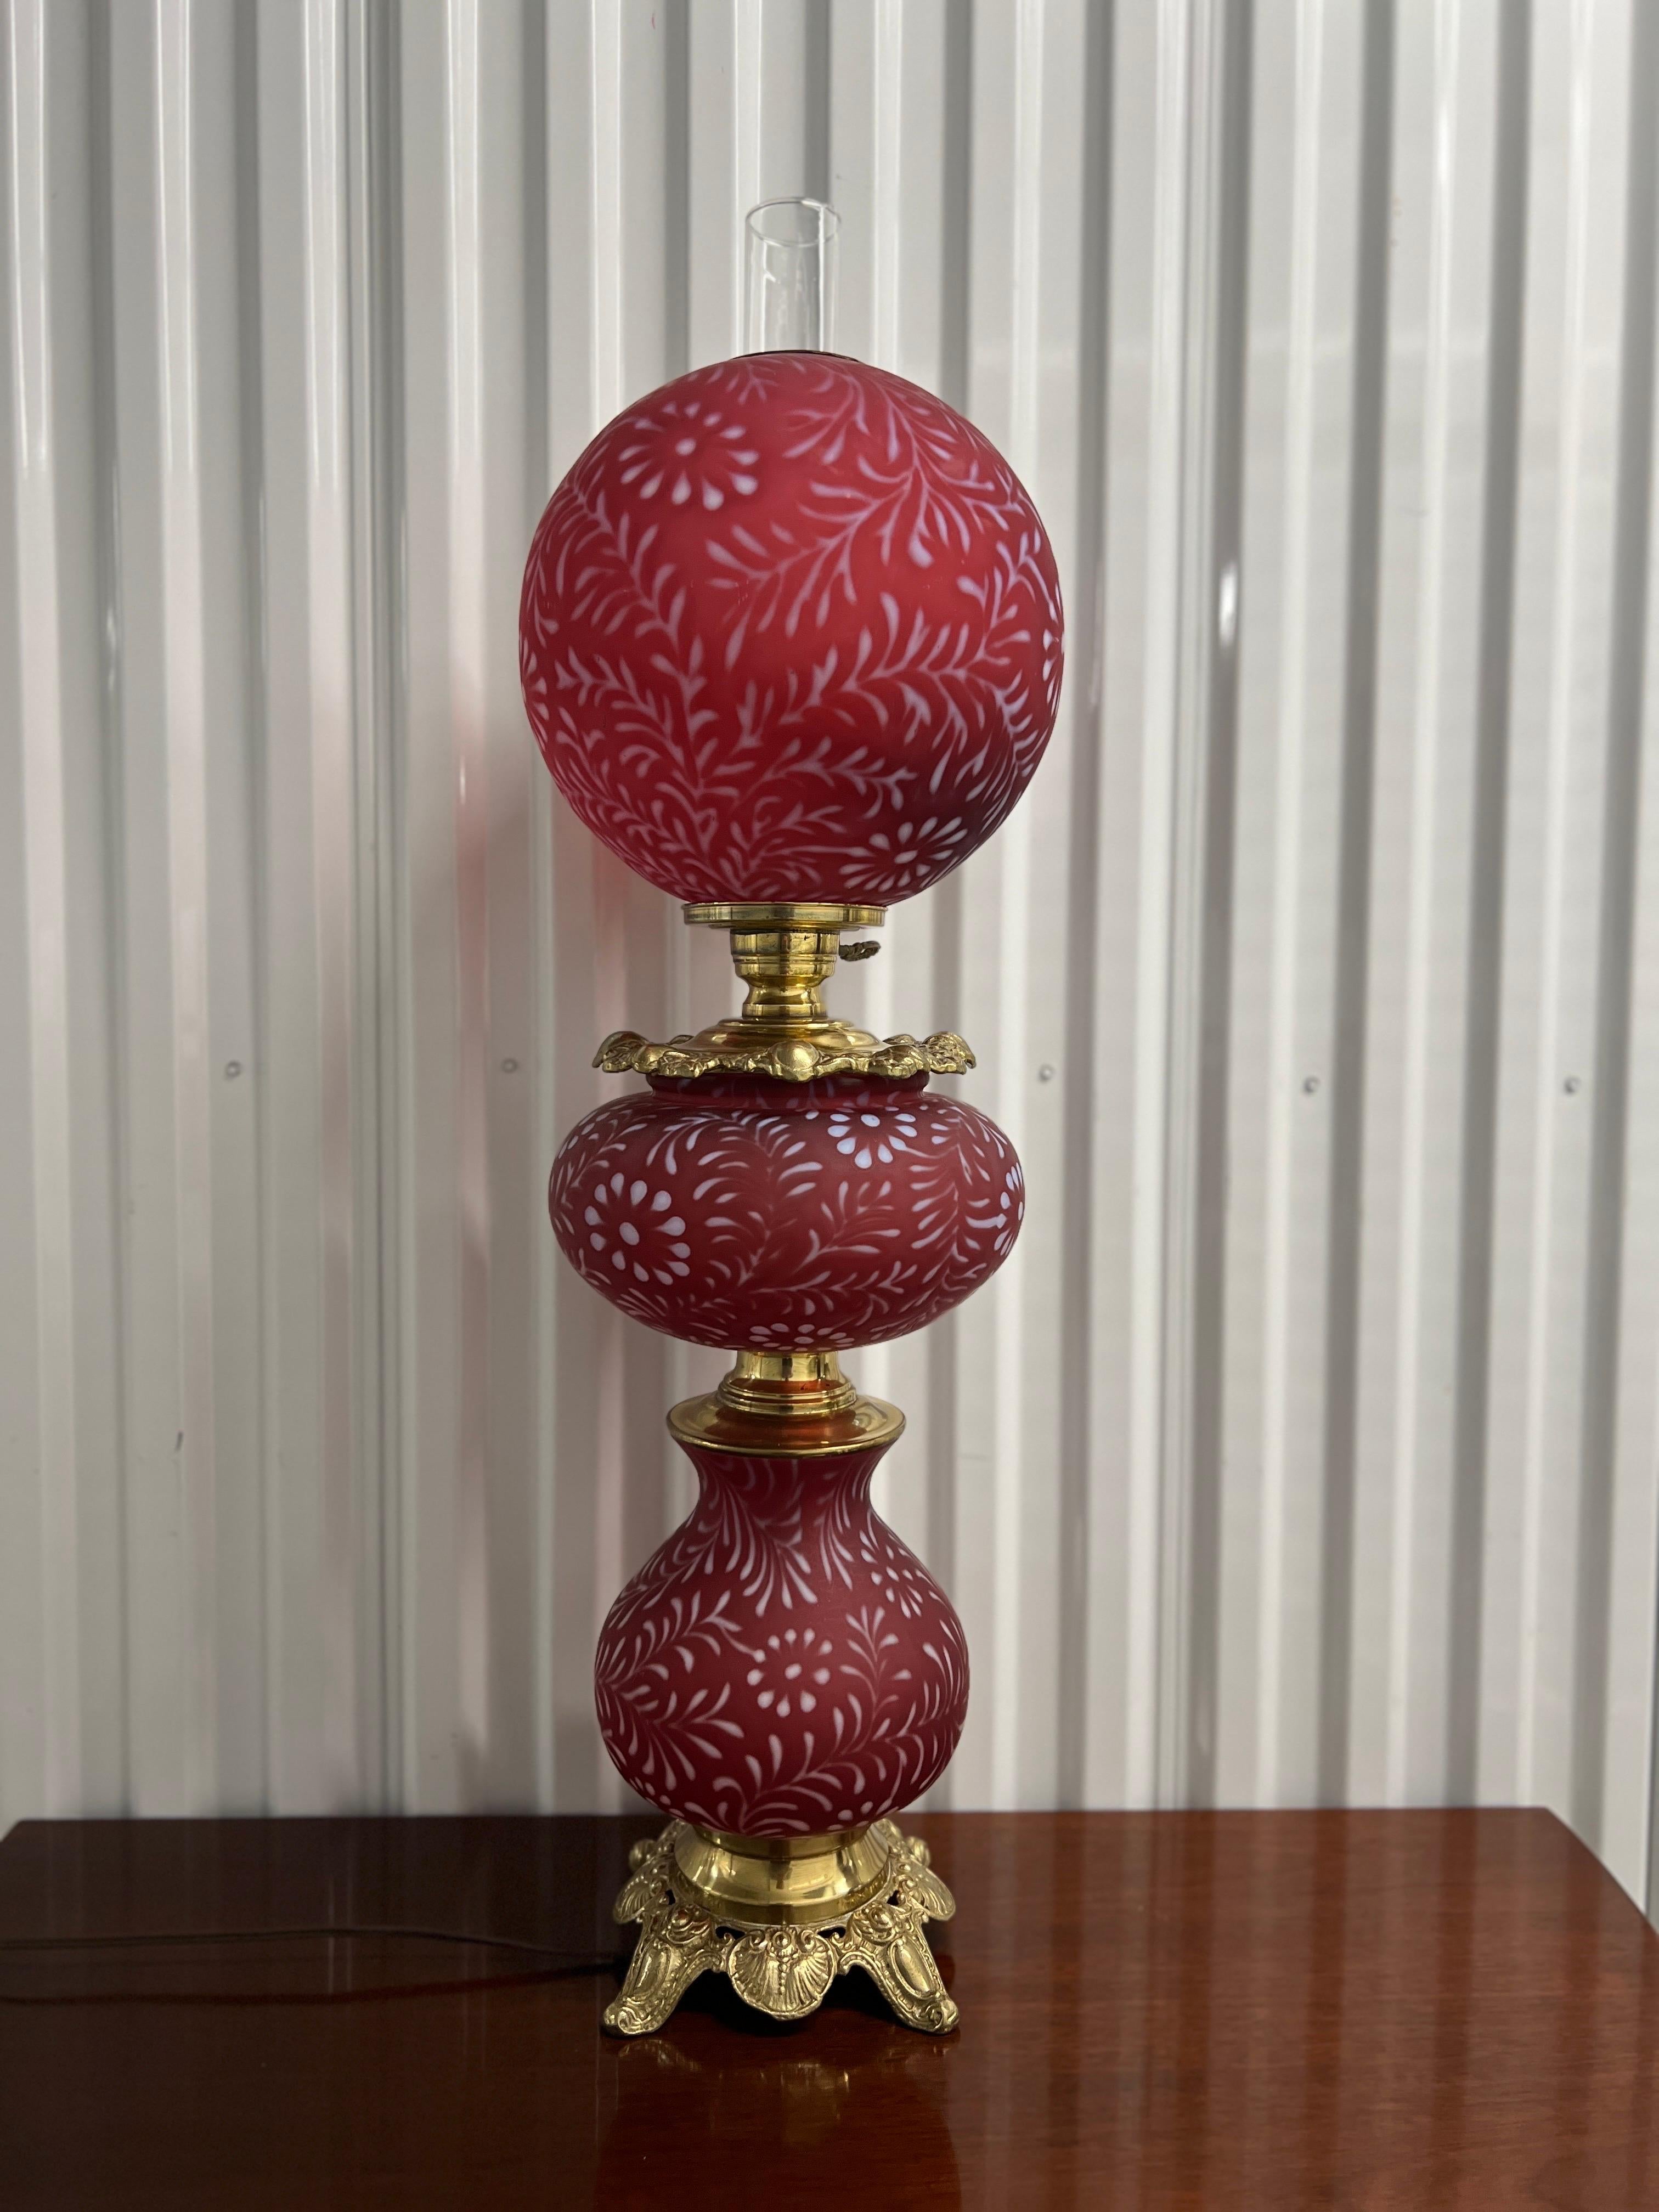 Fenton for LG Wright (American, circa 1970).

Stunning Fenton for LG Wright Daisy and Fern Cranberry Opalescent 3- Tier GWTW lamp!
This is the large version of the three tier lamp, not the shorter one that is typically seen around 
This lamp